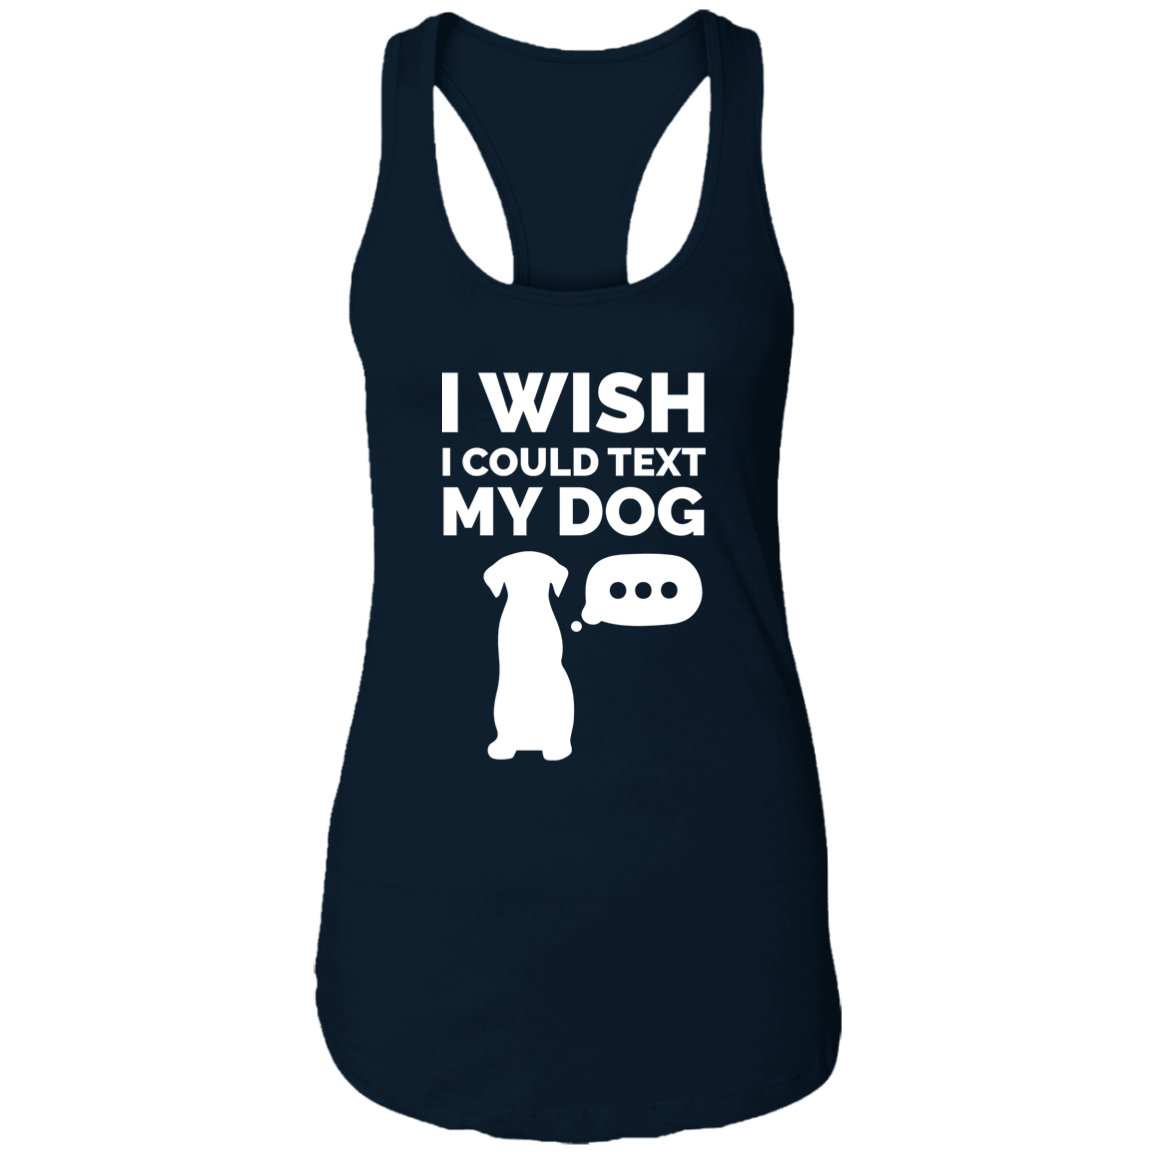 I Wish I Could Text My Dog - Ladies Racer Back Tank.